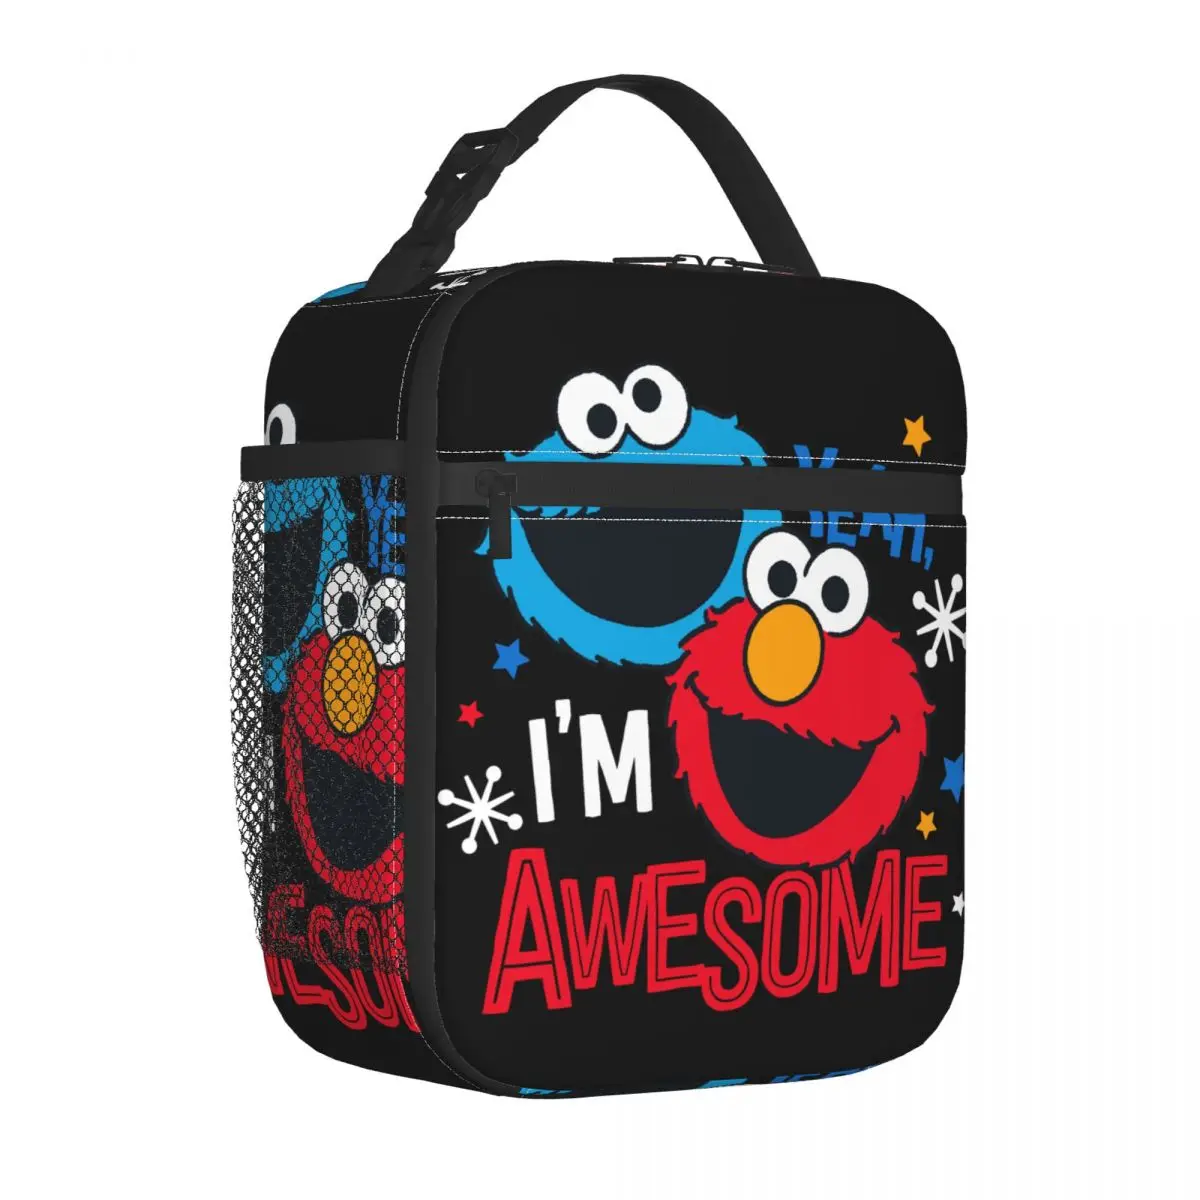 

Cookie Monster & Elmo Sesame Street Insulated Lunch Bag Thermal Bag Meal Container Large Tote Lunch Box Food Handbags School